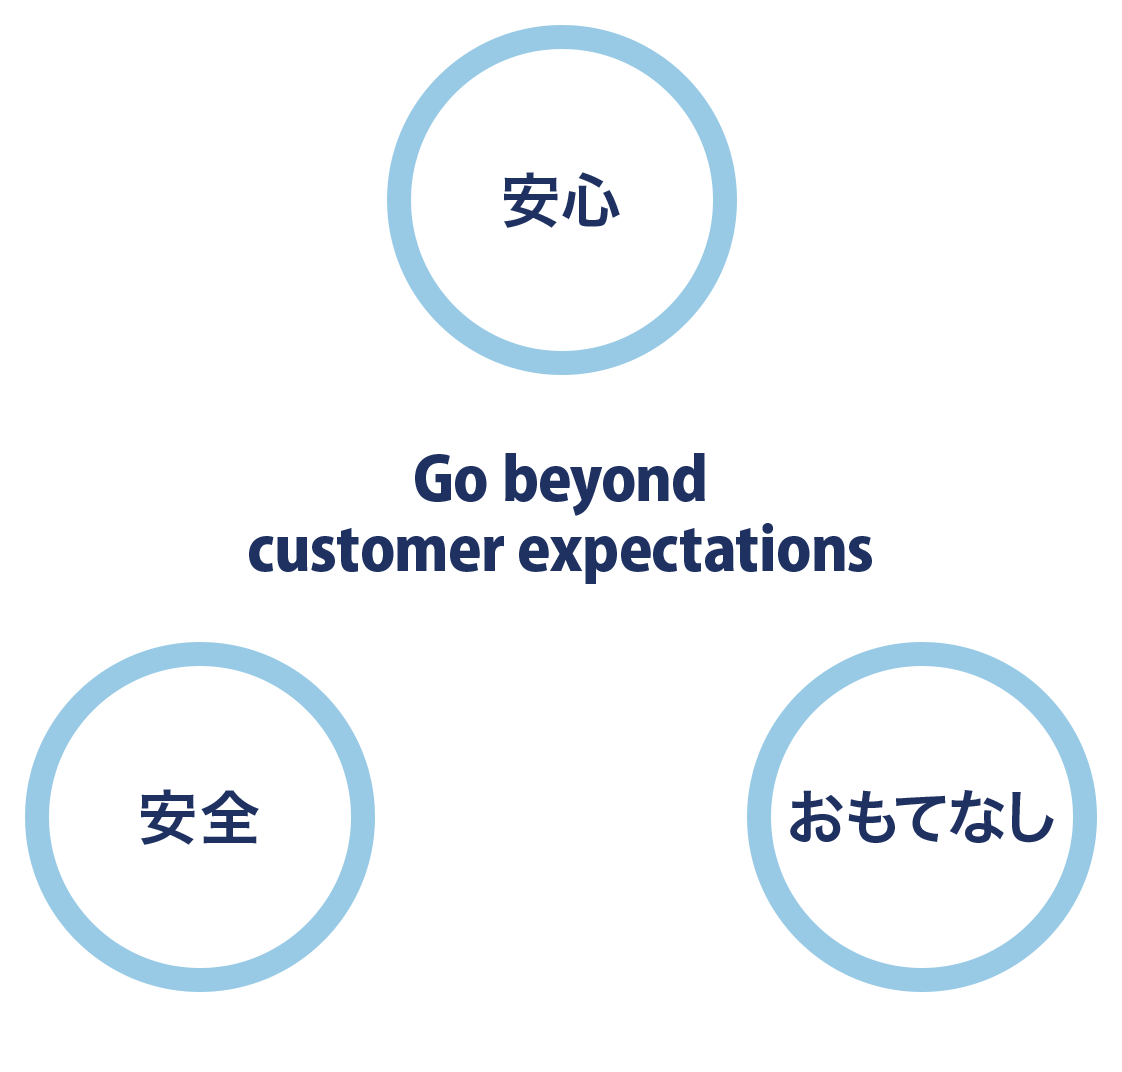 Go beyond customer expectations